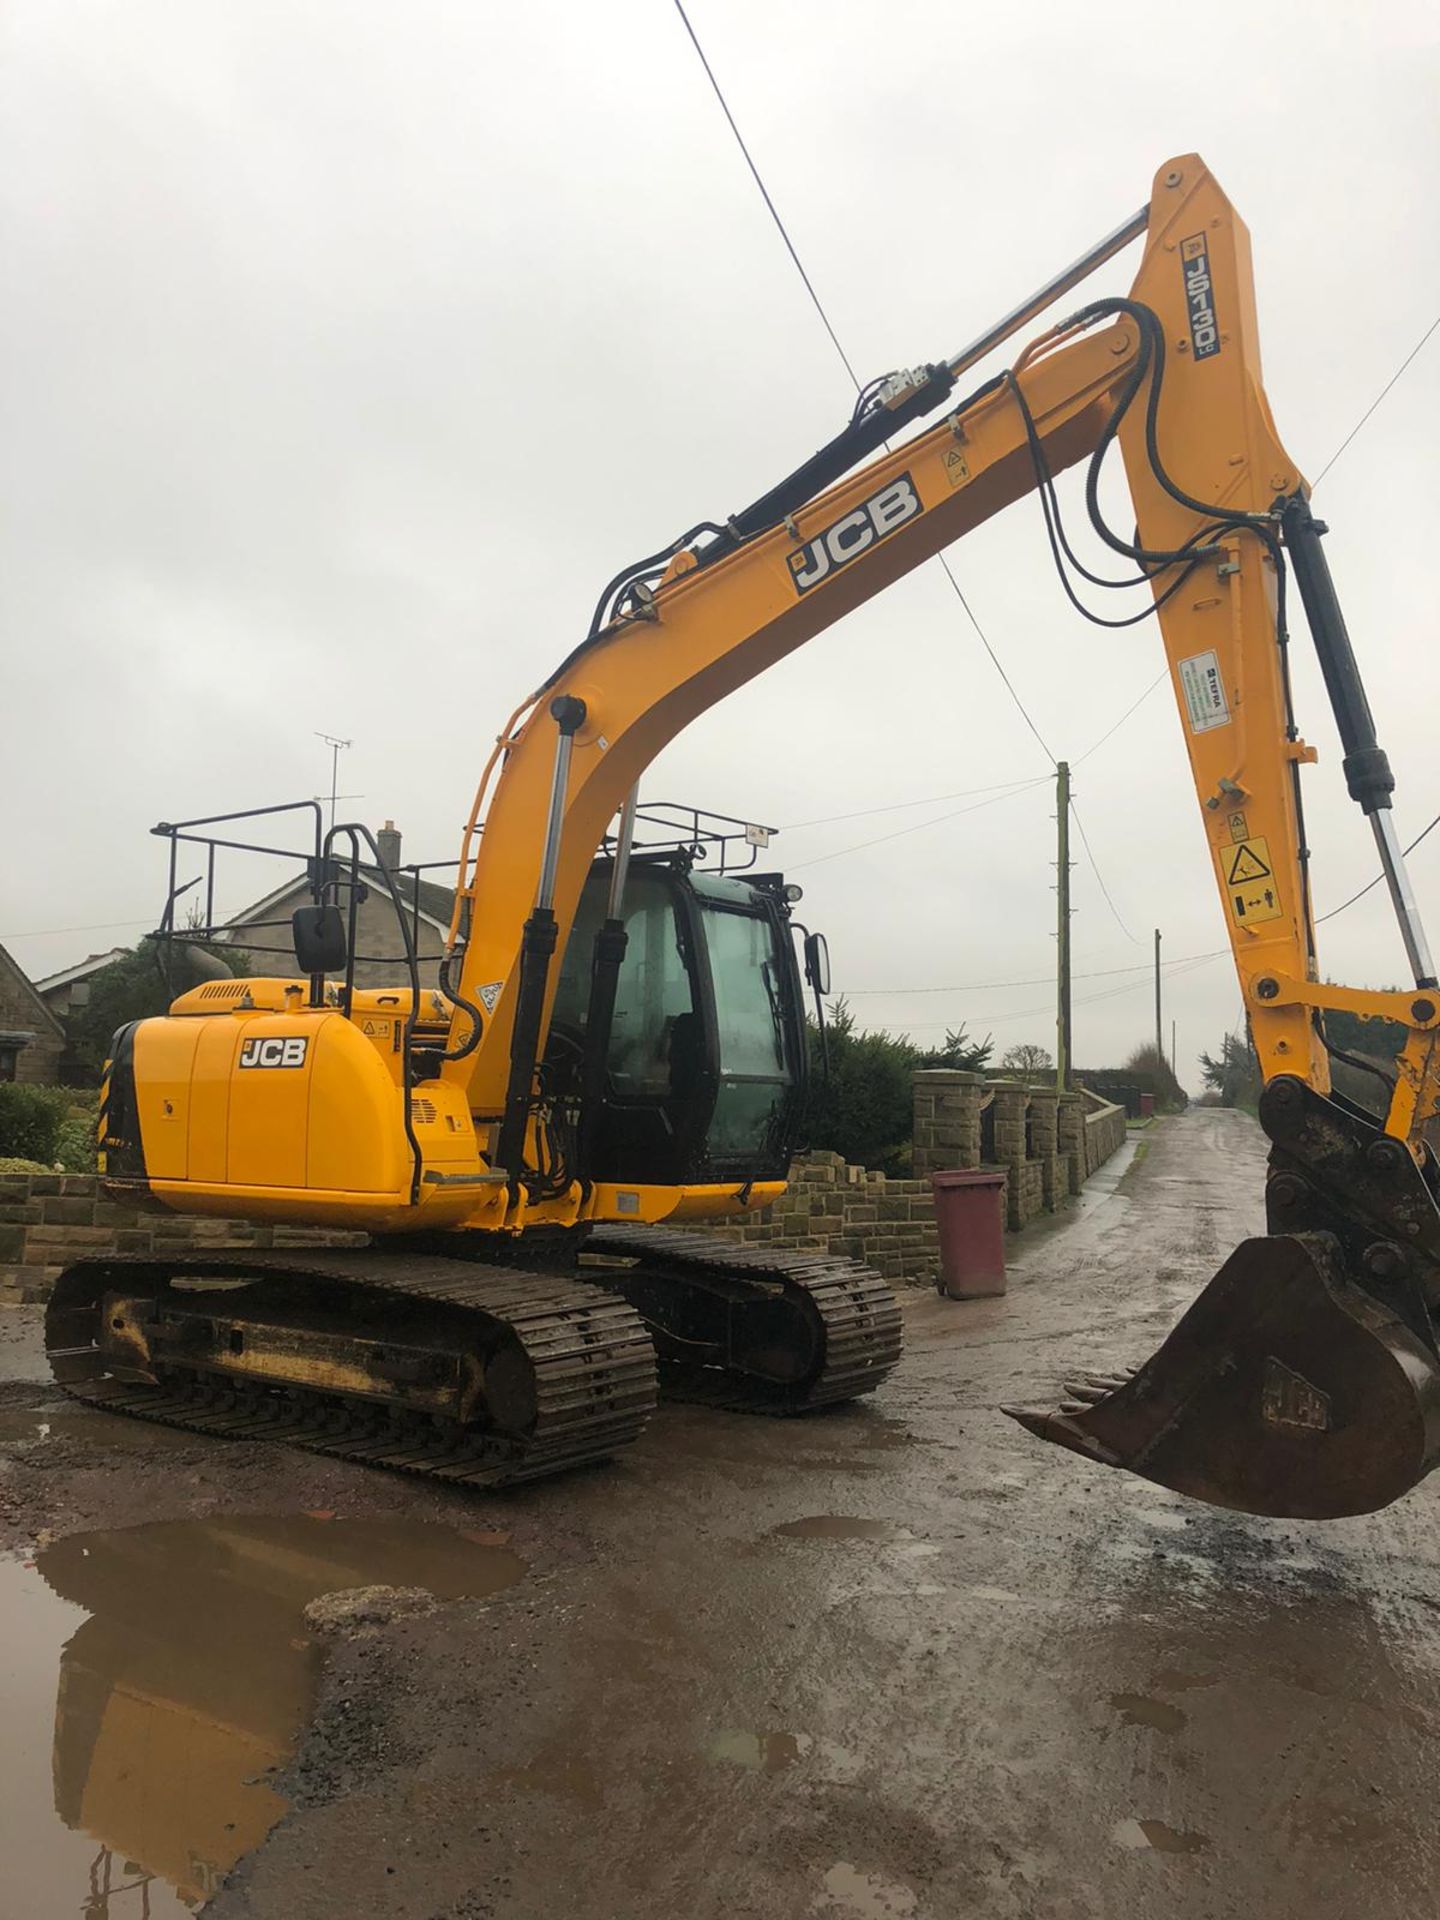 2015 JCB JS130LC 13 TON TRACKED CRAWLER EXCAVATOR / DIGGER, IN VERY GOOD CONDITION, LOW HOURS 4620! - Image 3 of 11